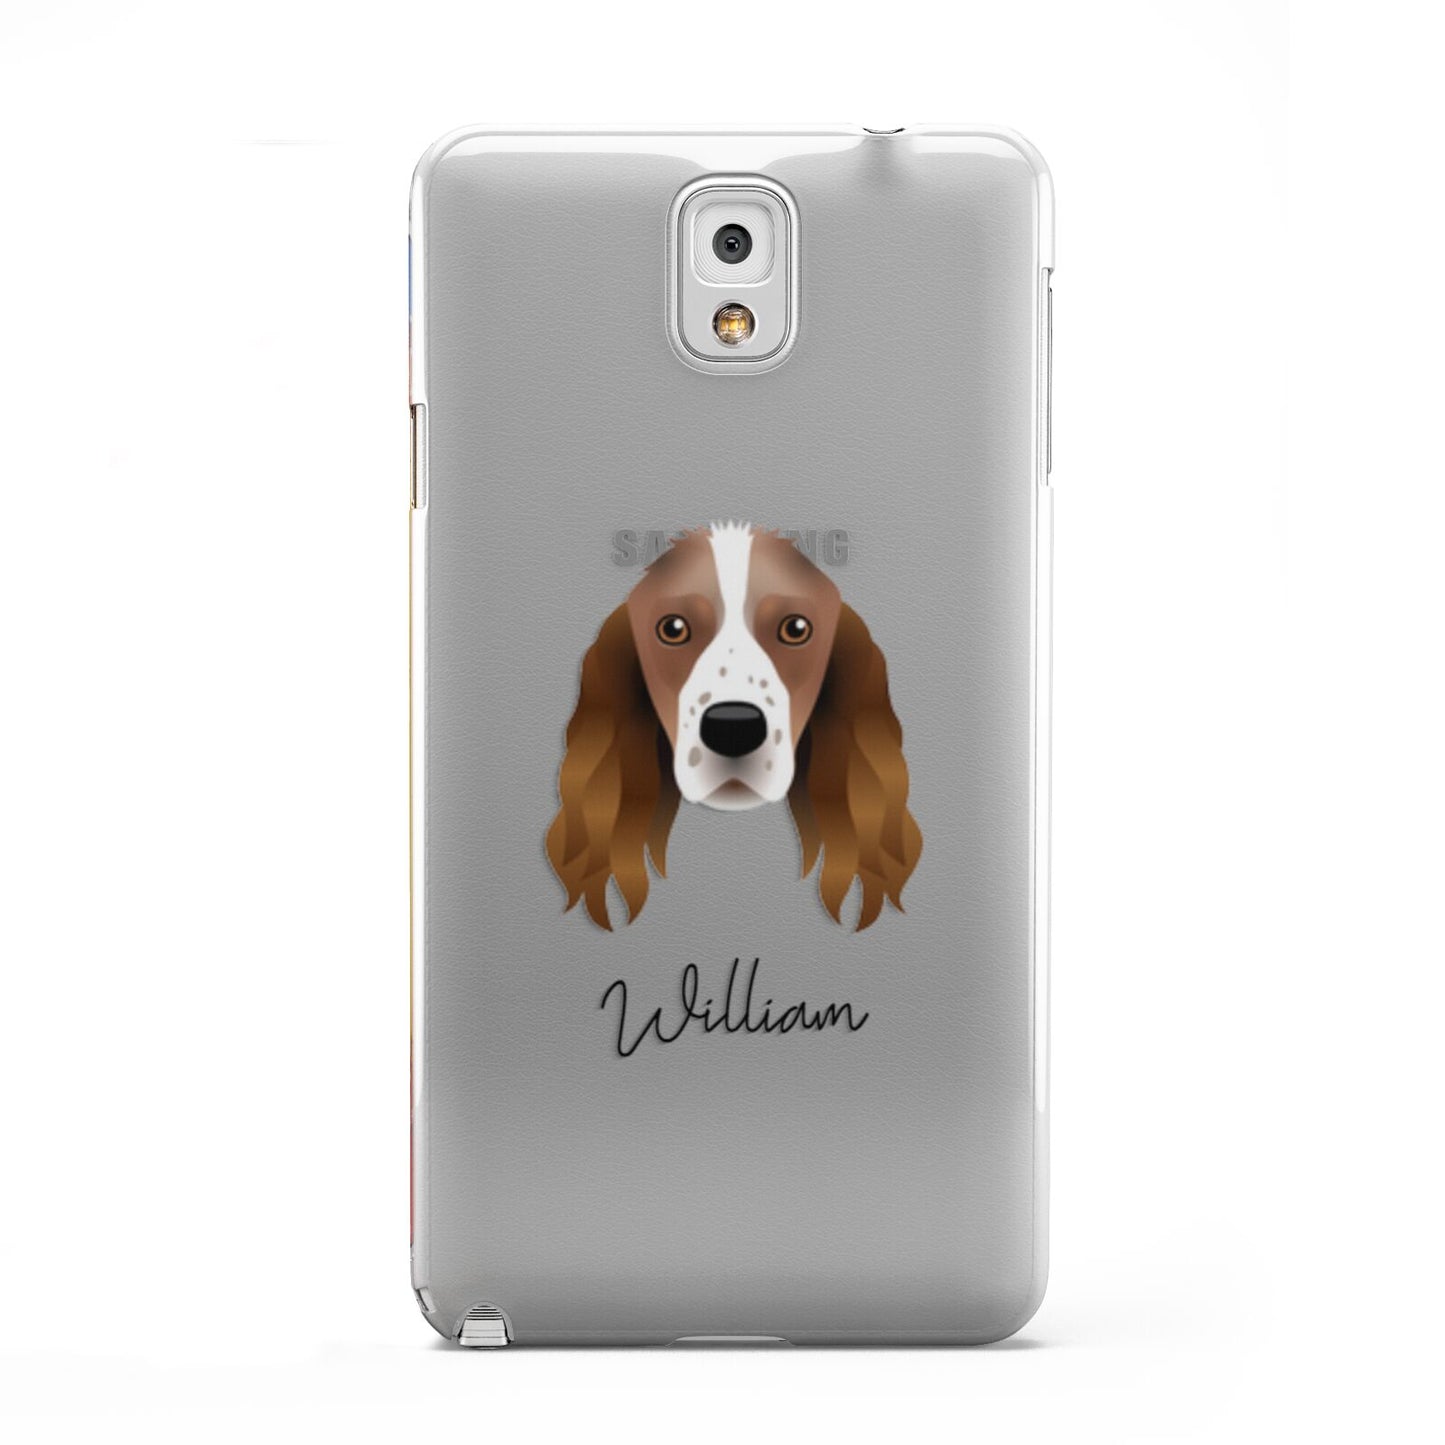 Springer Spaniel Personalised Samsung Galaxy Note 3 Case